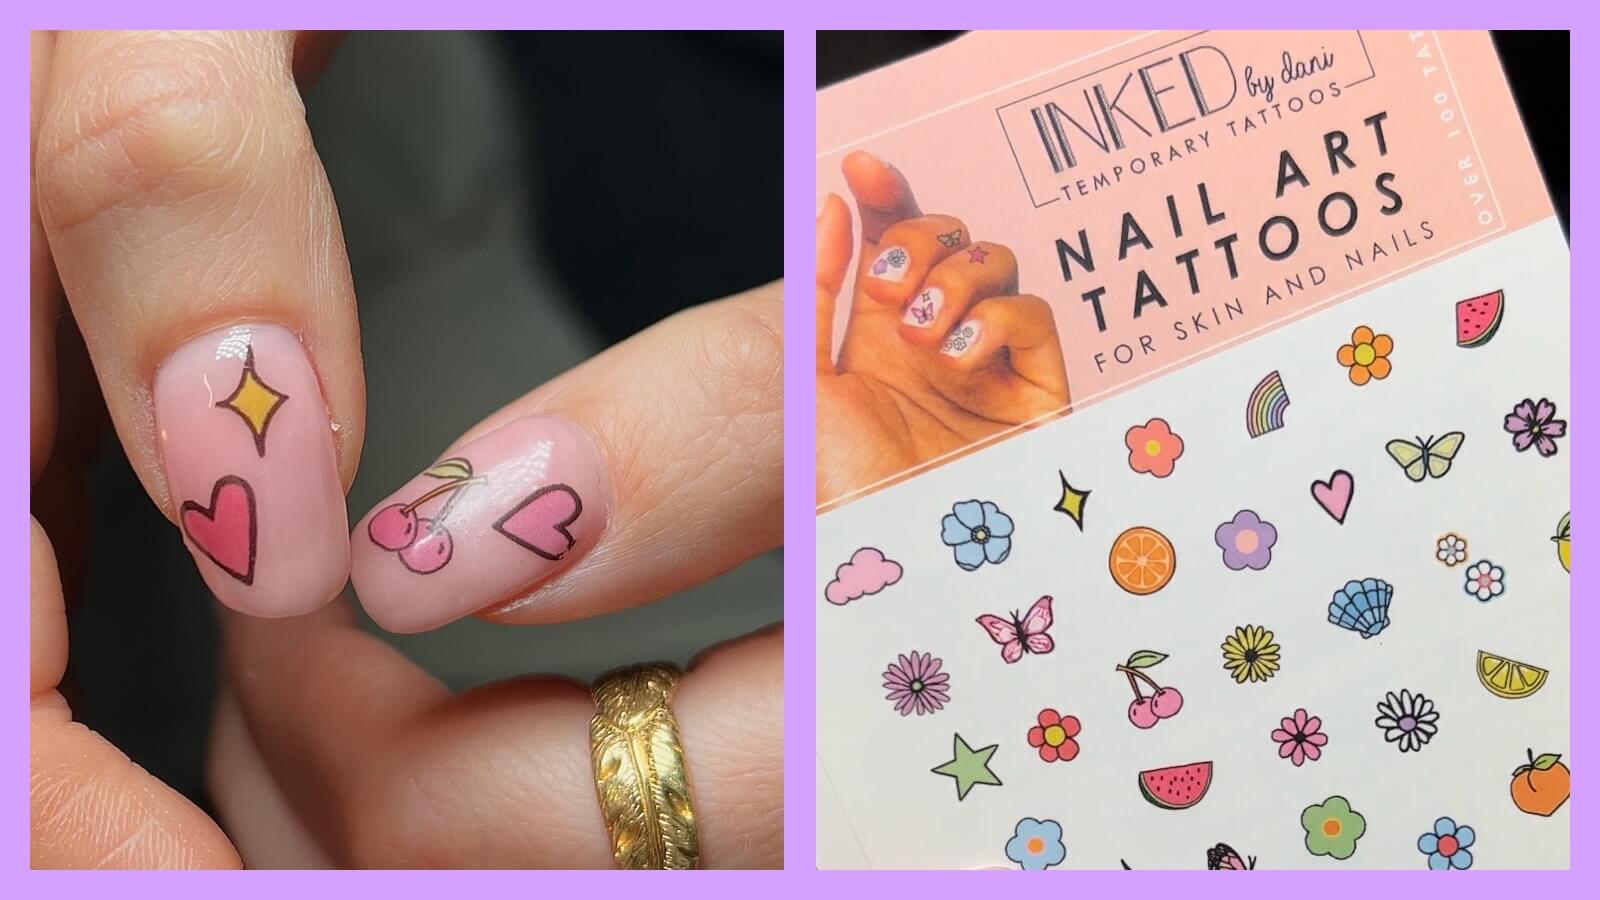 Been tattooing my fingernails for about a year now. What designs shoul... |  TikTok